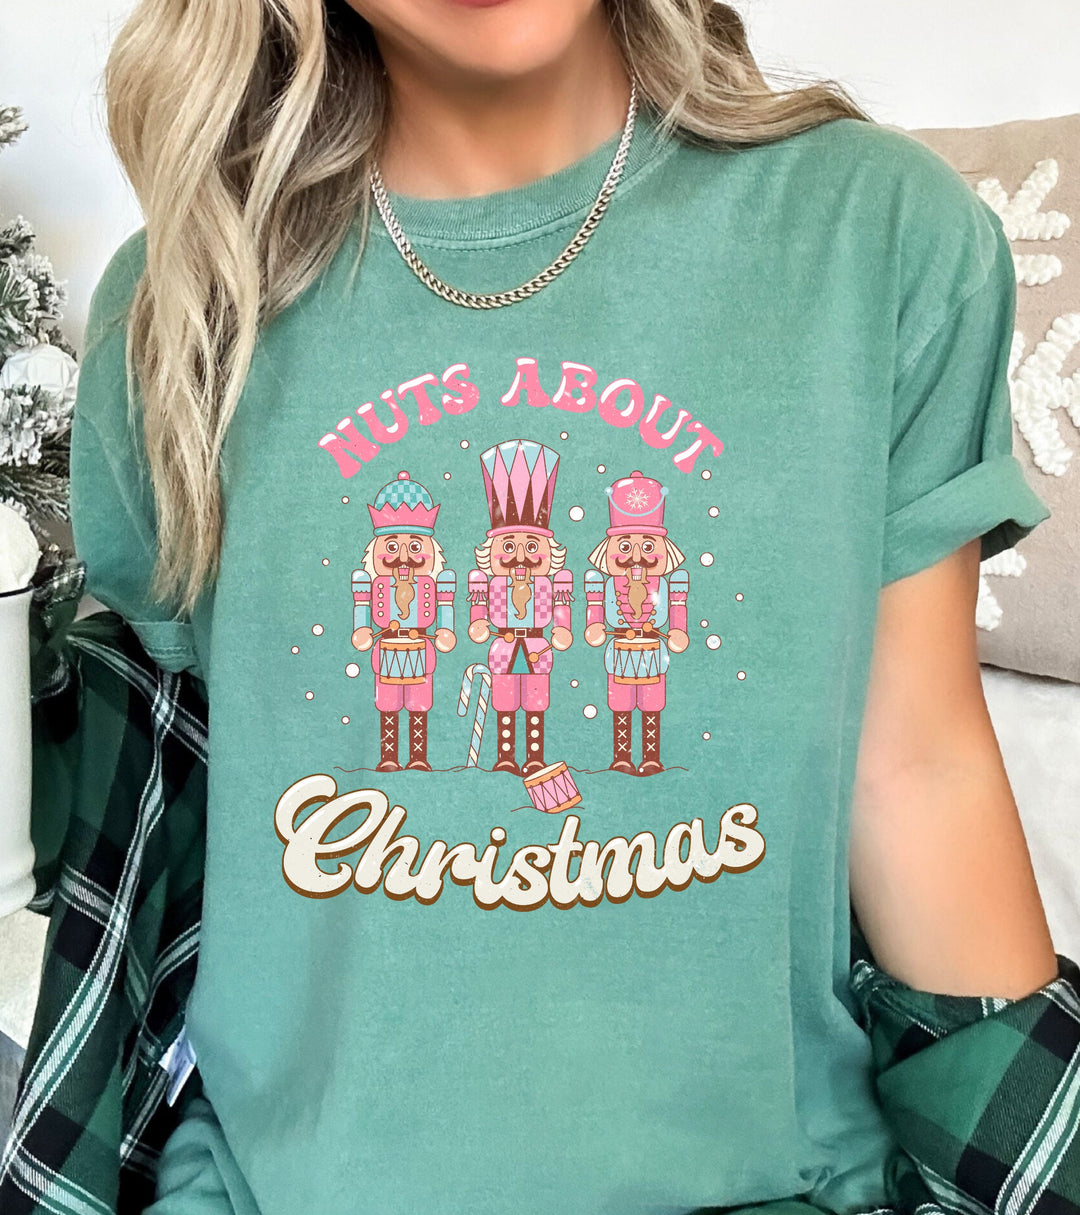 NUTS ABOUT CHRISTMAS TEE (COMFORT COLORS)